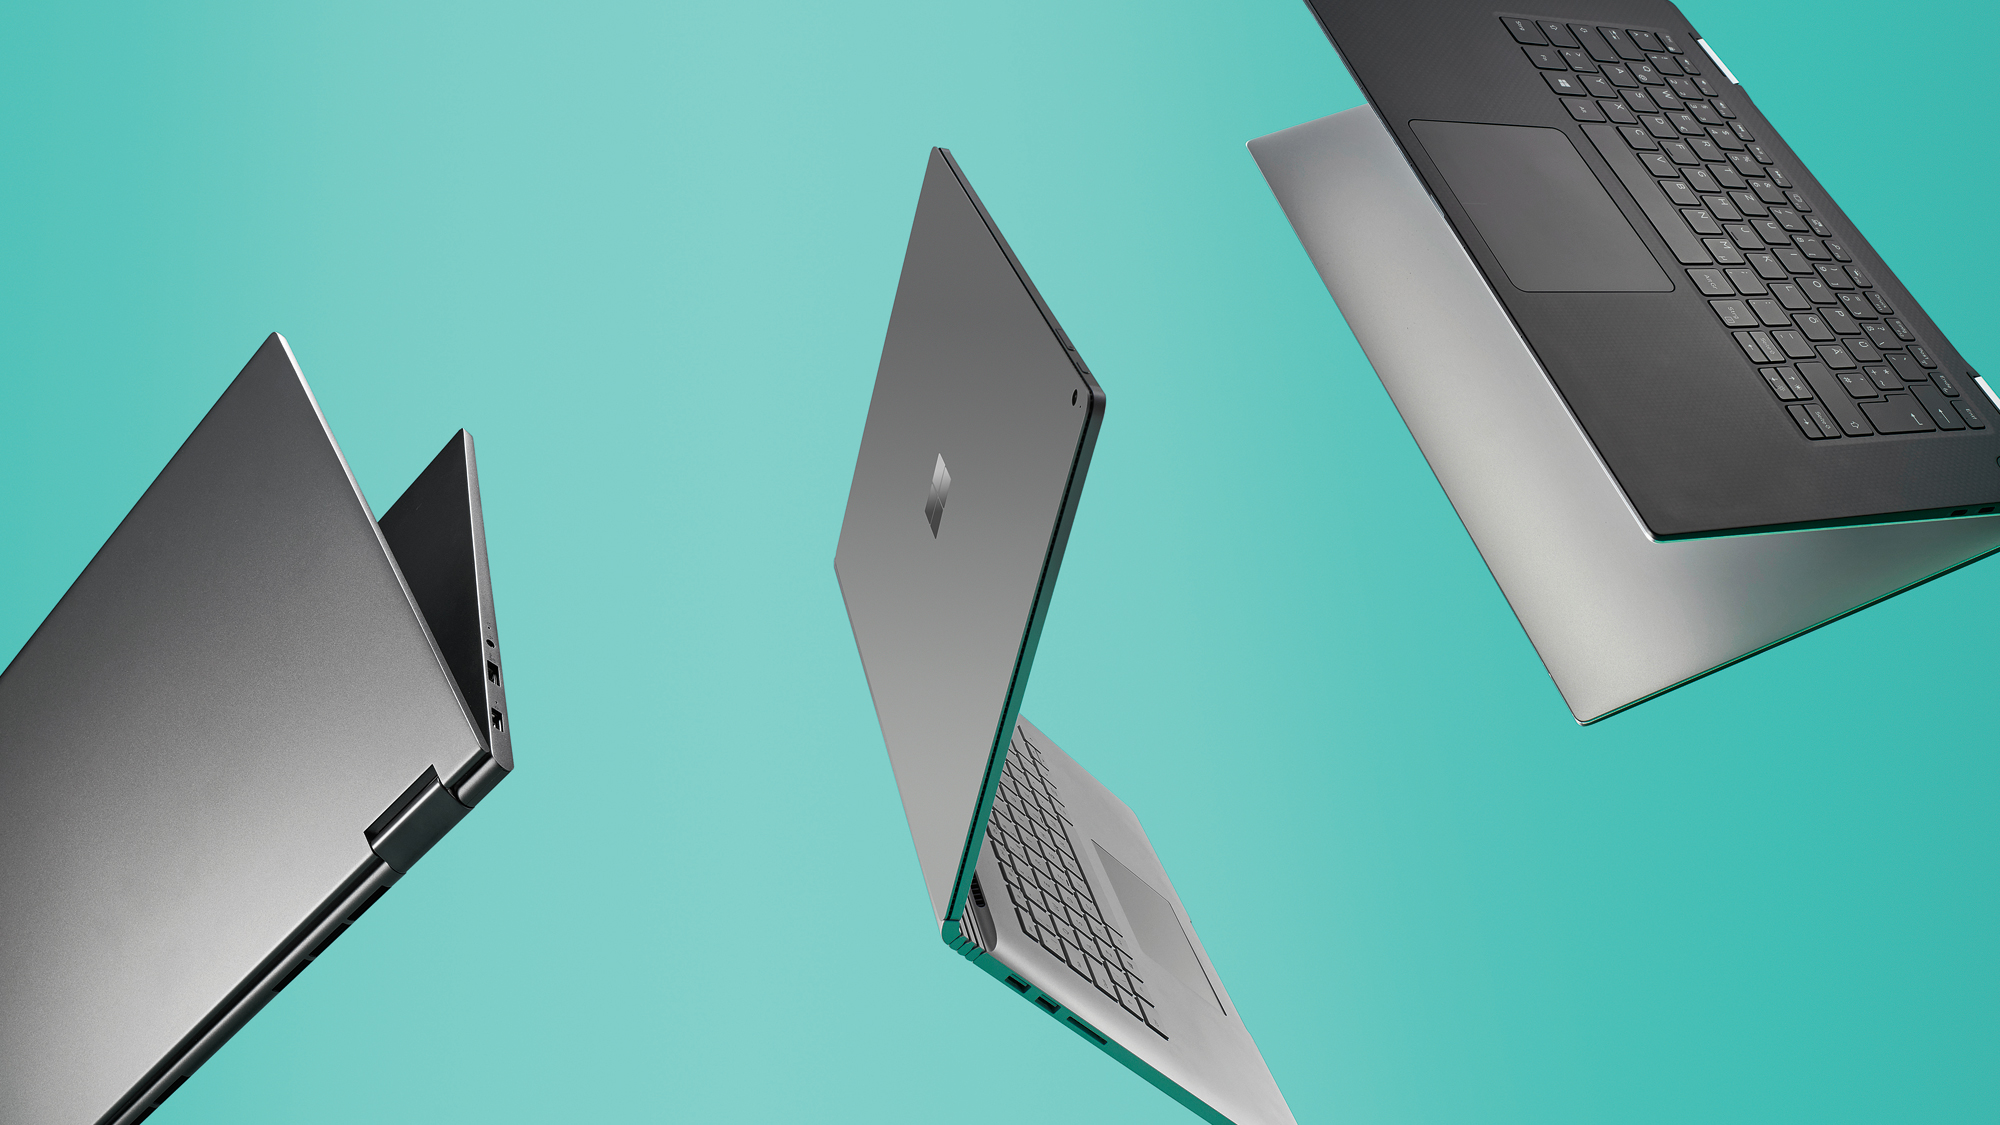 The Best Laptops Of 2020 In Australia Our Picks Of The Top Laptops On Sale Now Techradar